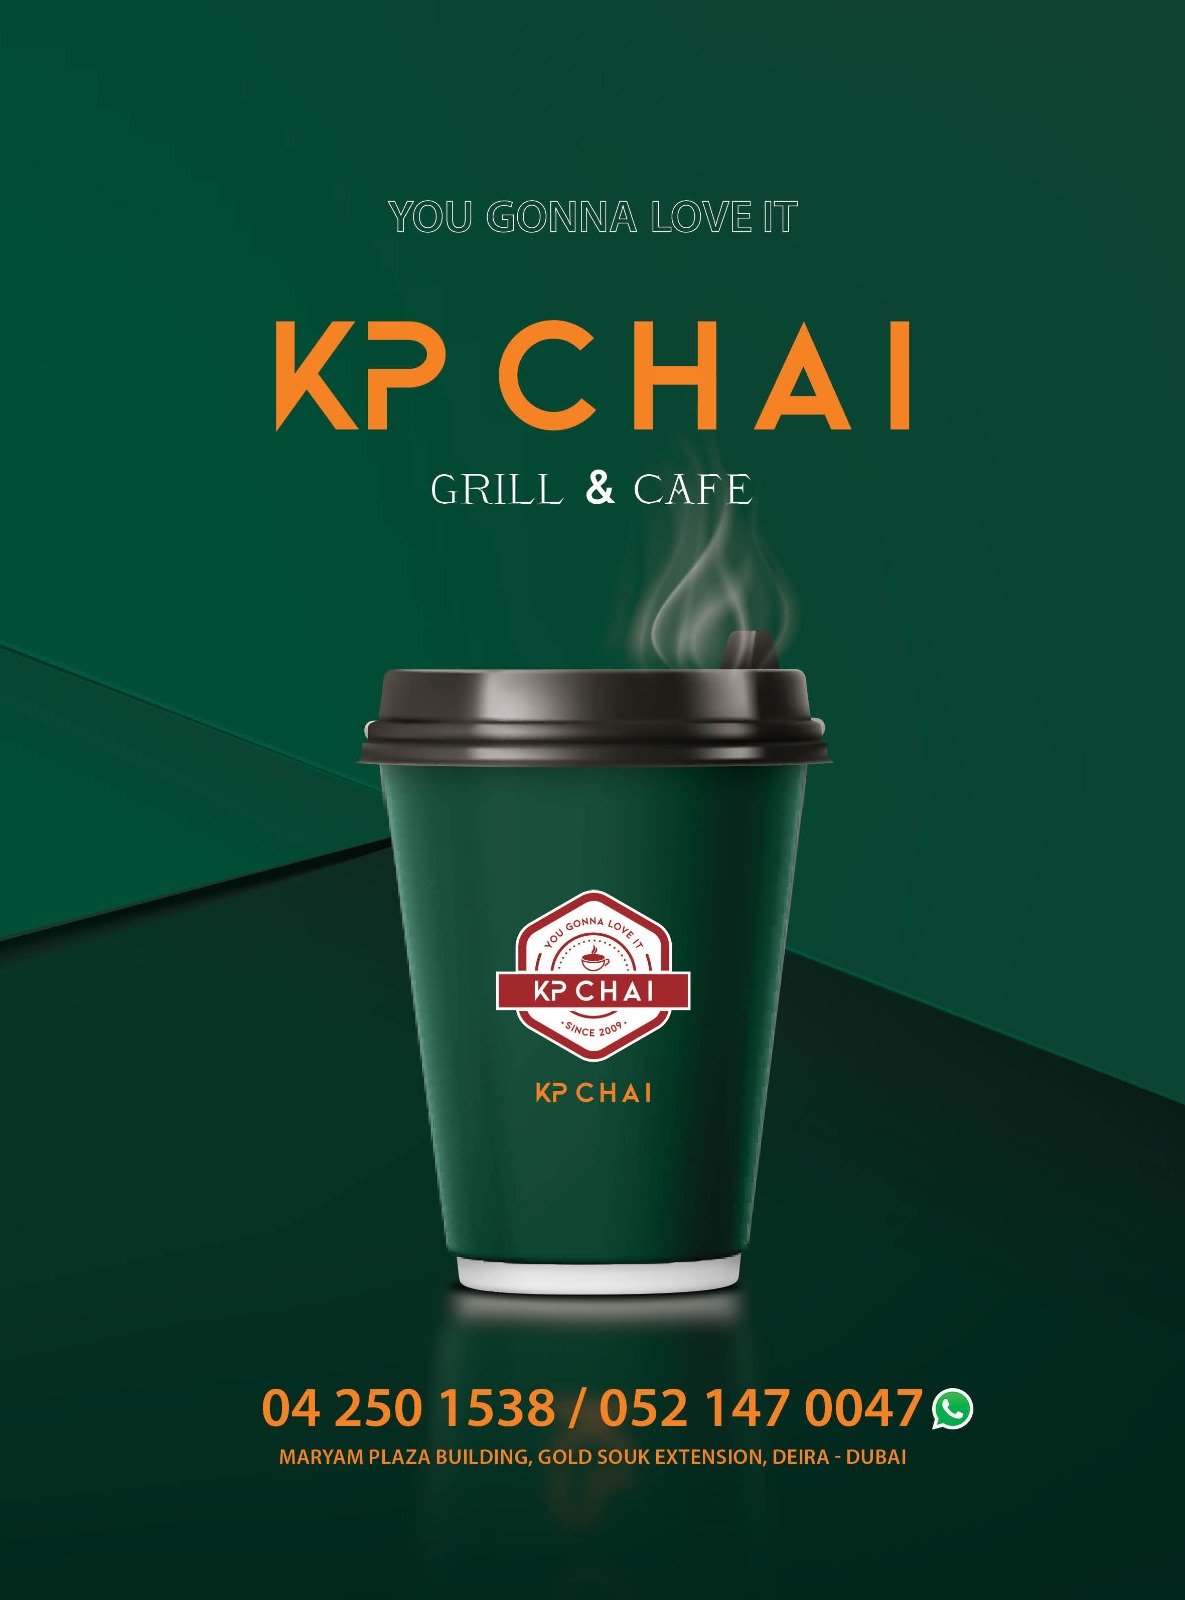 KP CHAI GRILL & CAFE YOU GONNA LOVE IT